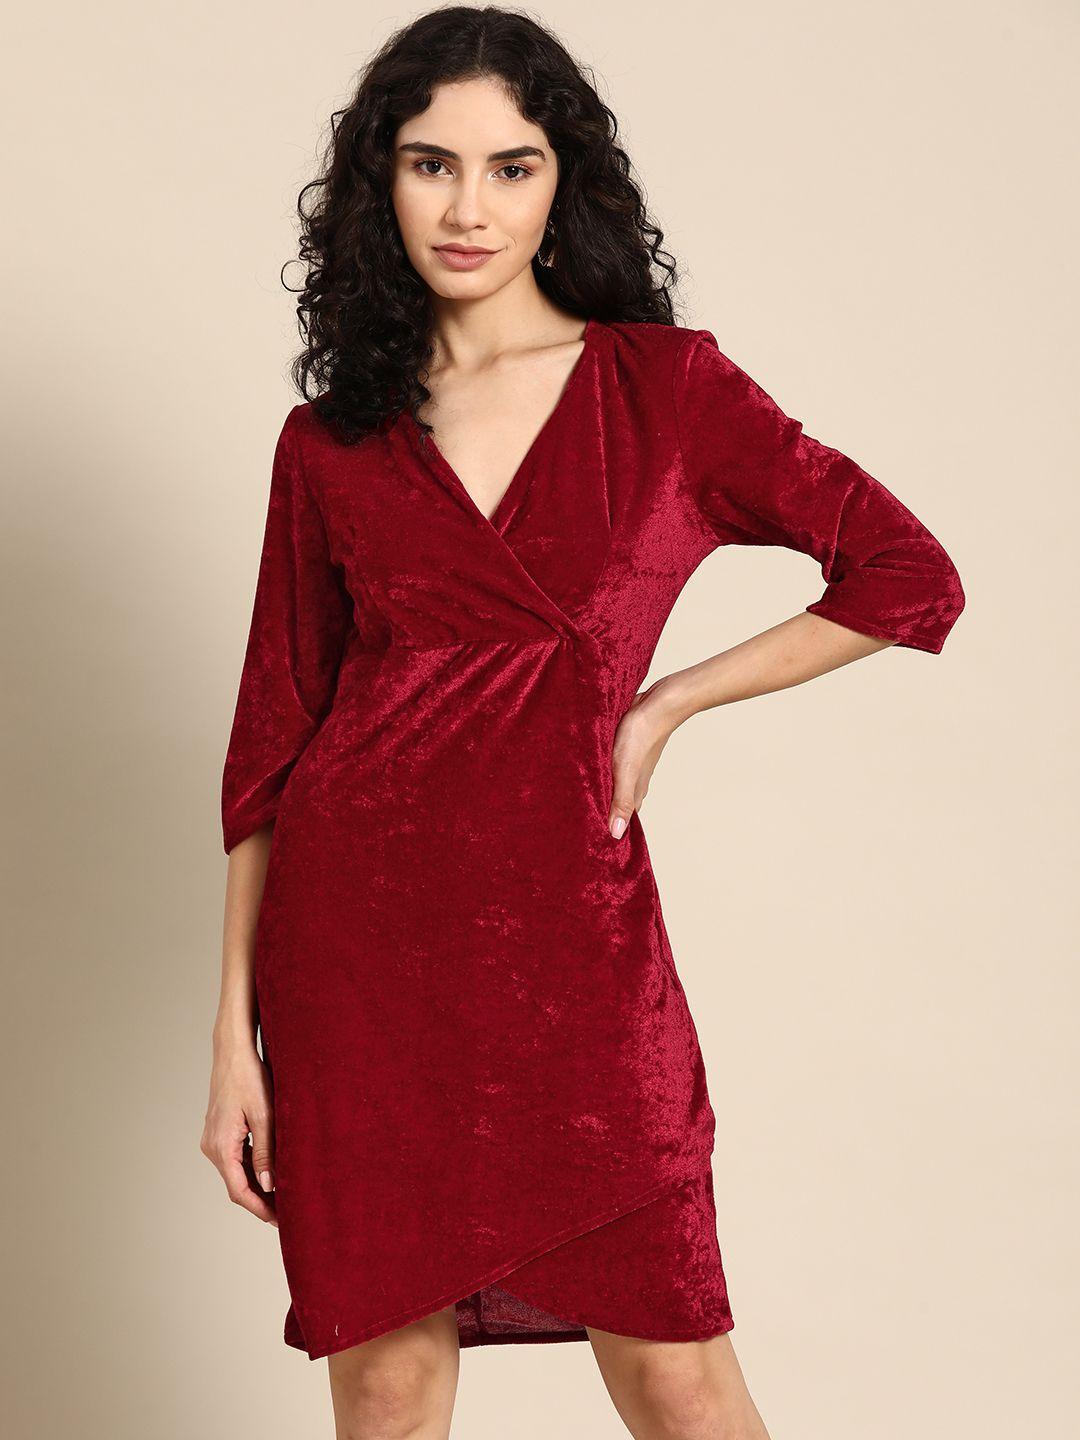 dodo-&-moa-red-solid-dress